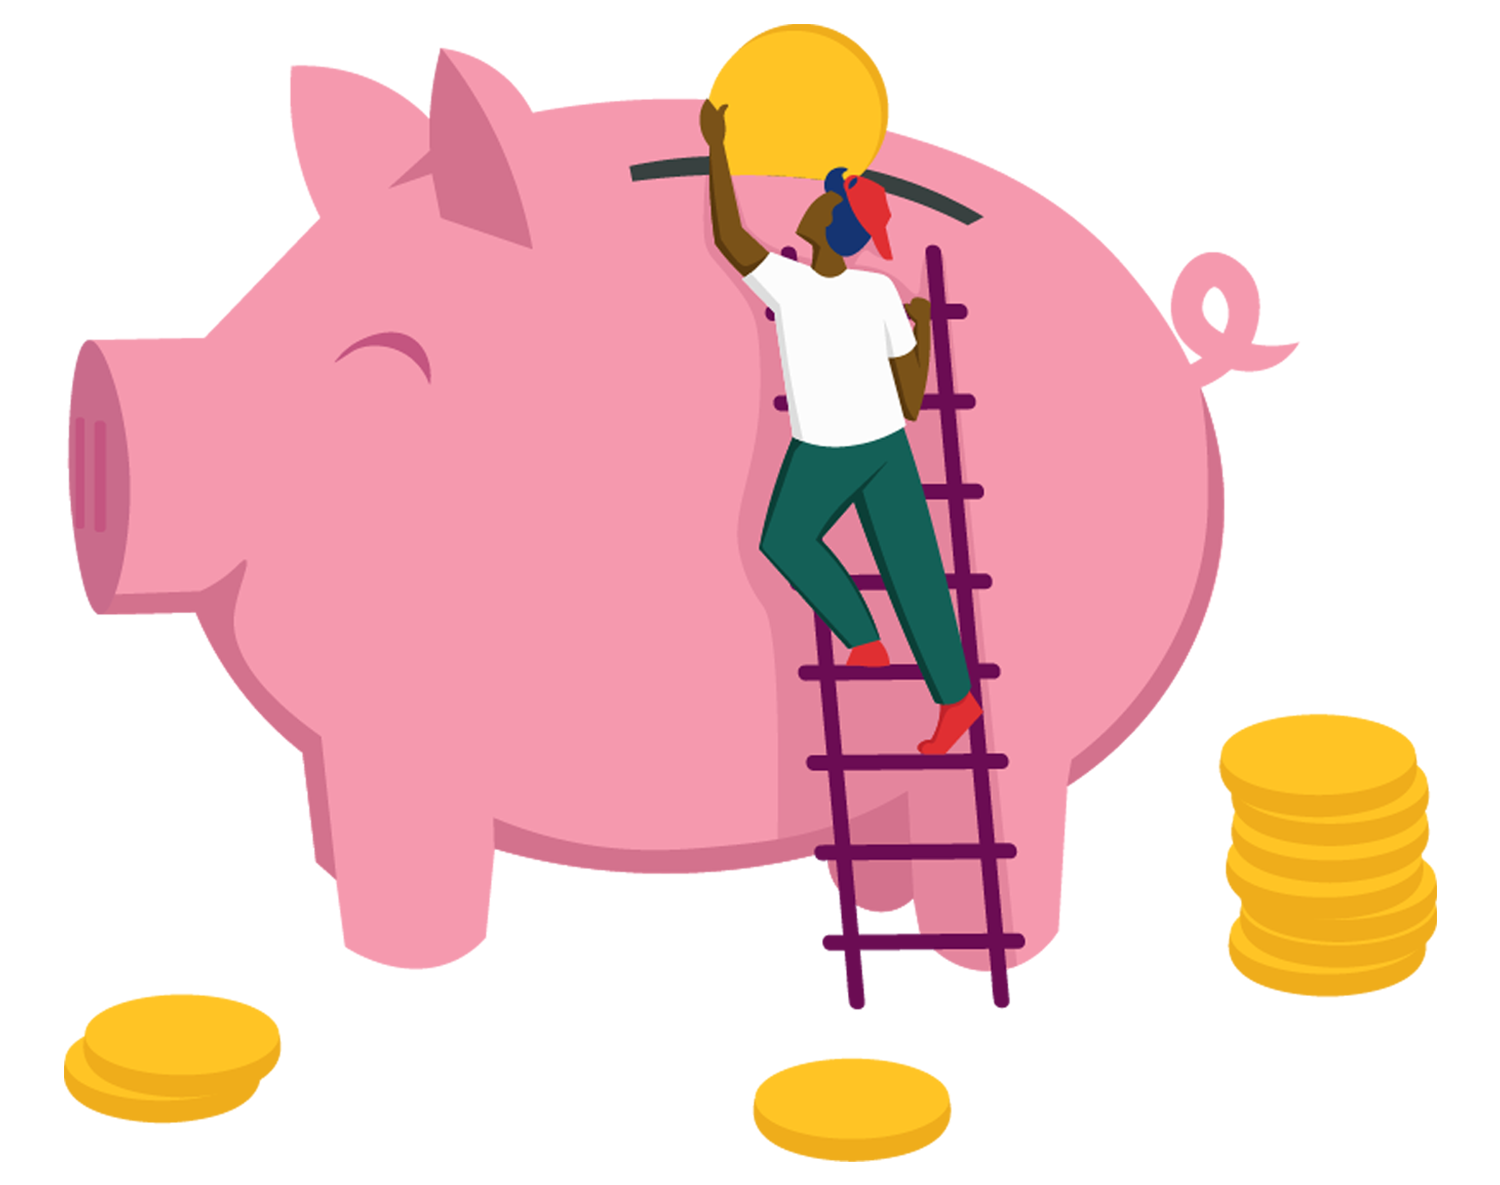 Illustration of person putting money in piggy bank